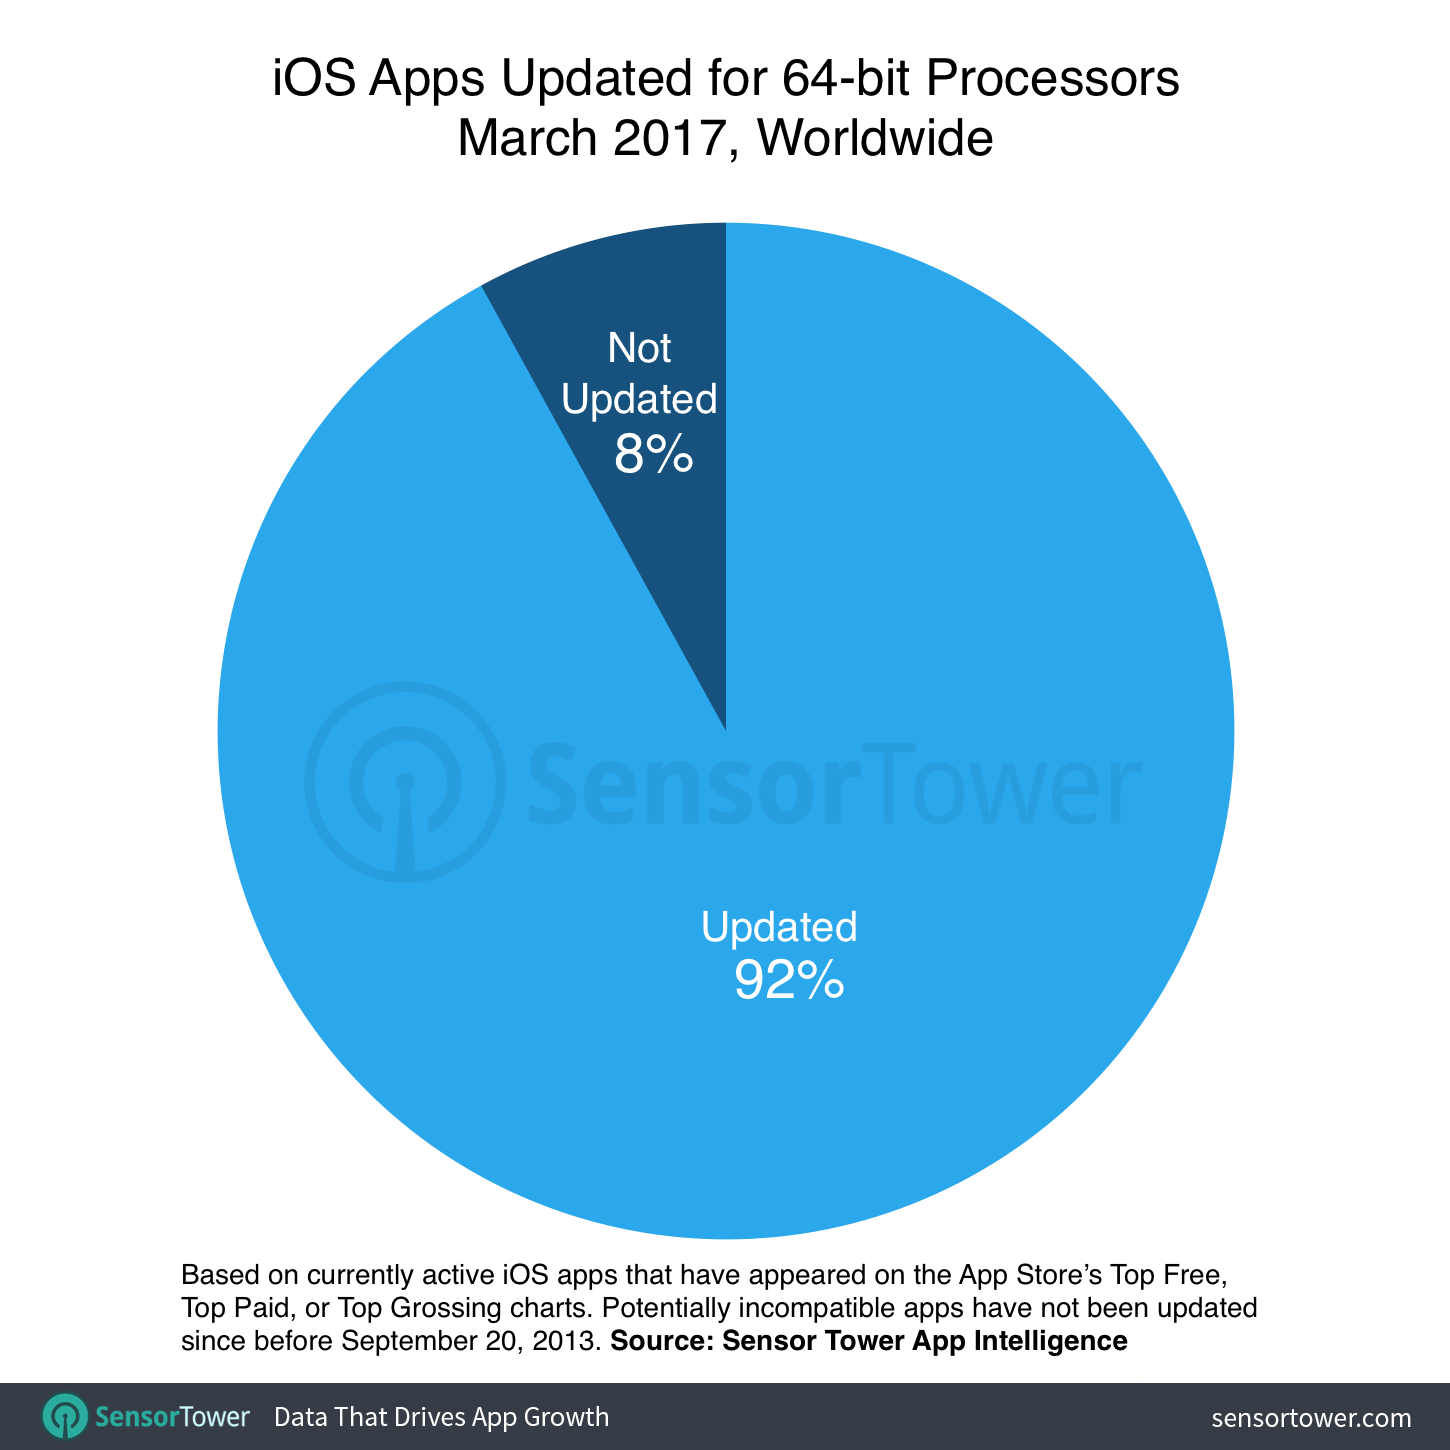 Percentage of active iOS apps that may not be compatible with future iOS versions